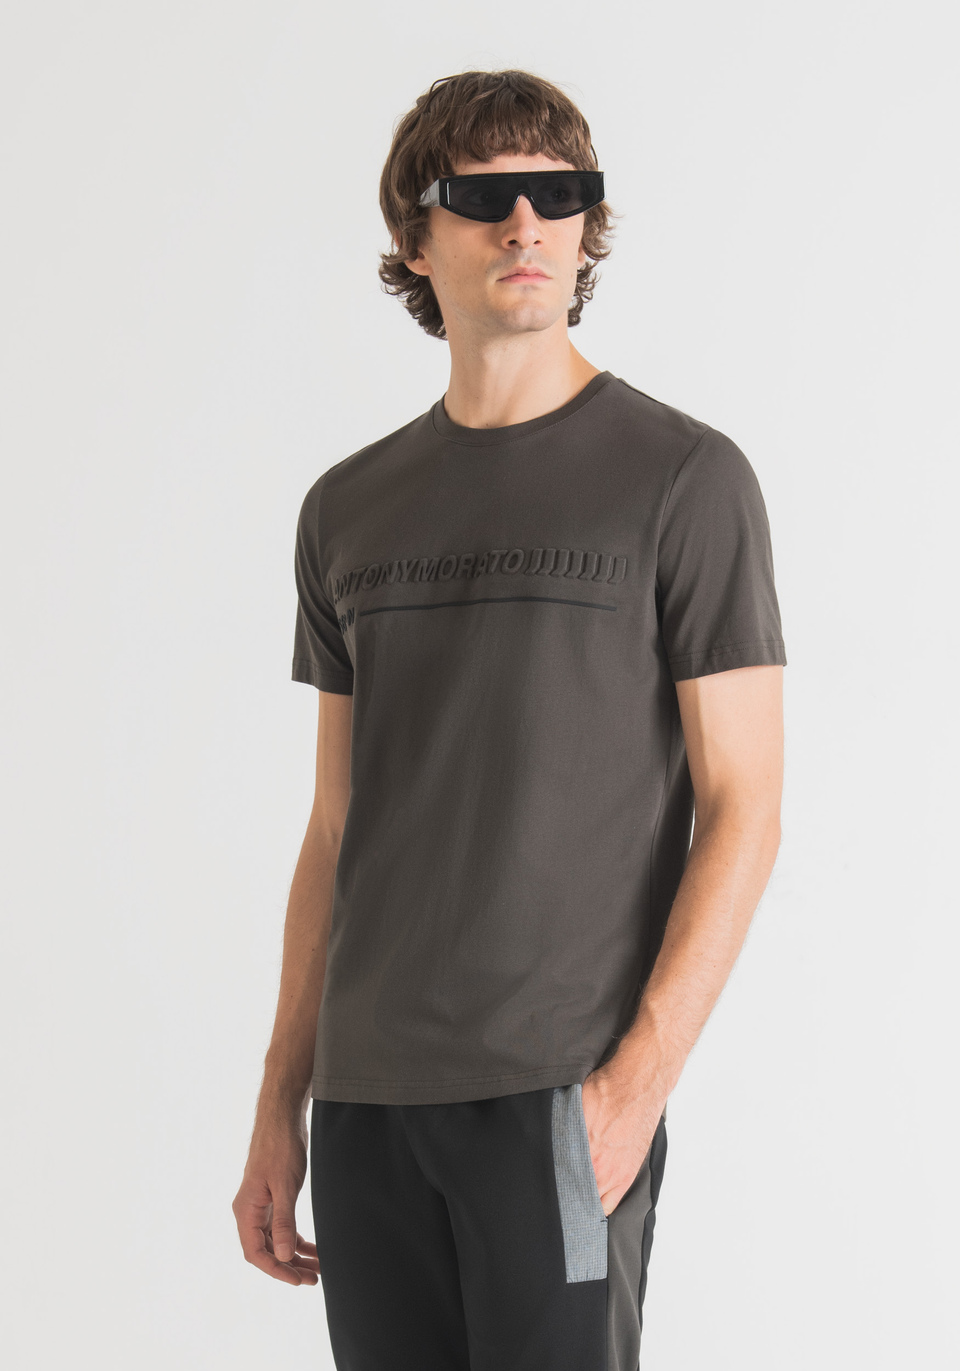 SLIM FIT T-SHIRT IN COTTON JERSEY WITH EMBOSSED TONE-ON-TONE LOGO - Antony Morato Online Shop